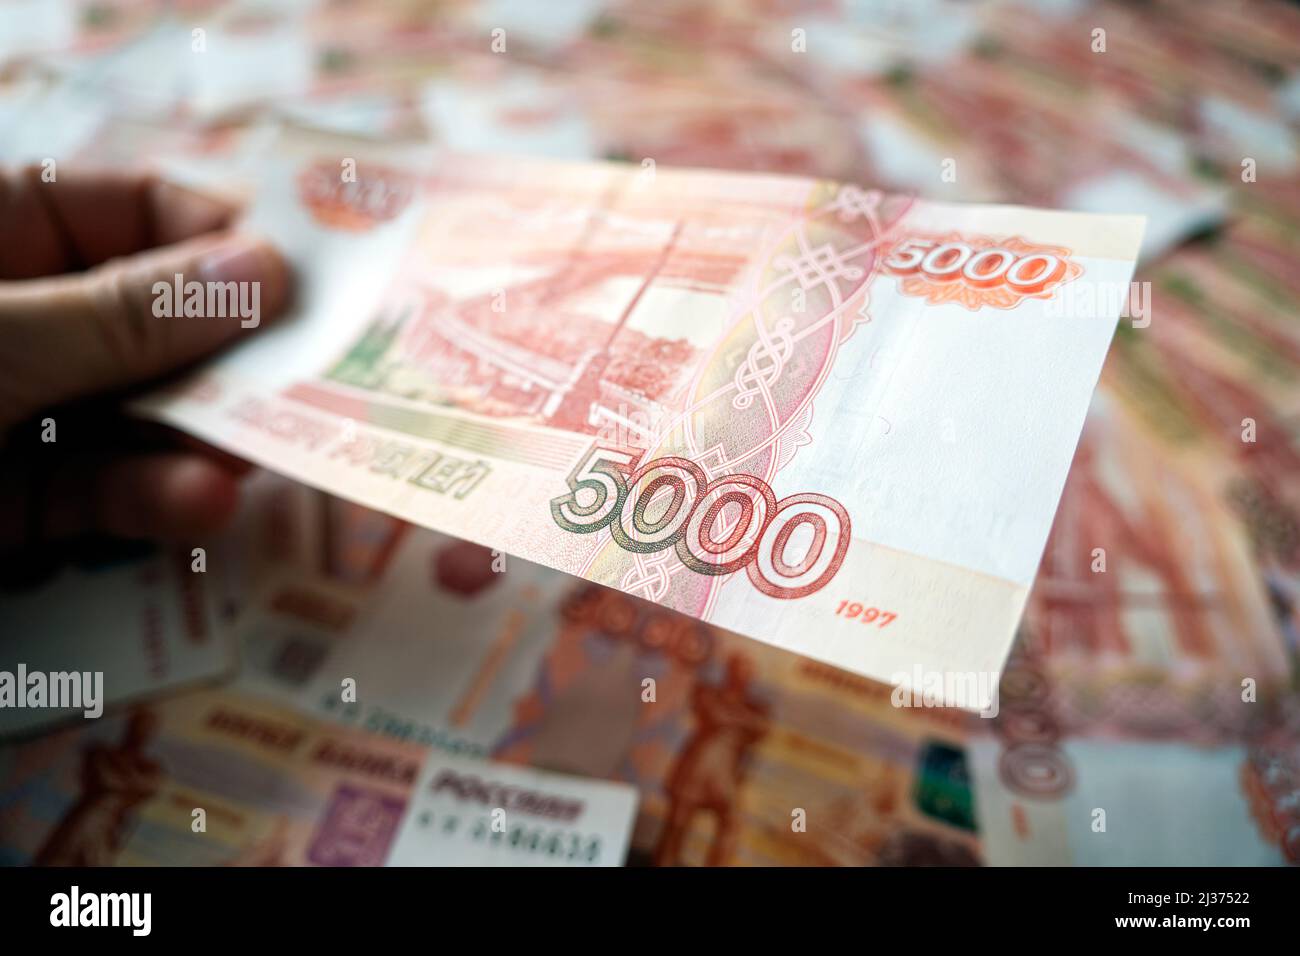 a lot of money in hand of a young businessman on a blue background. A stack of banknotes of Russian rubles with a face value of 5000 rubles. successfu Stock Photo